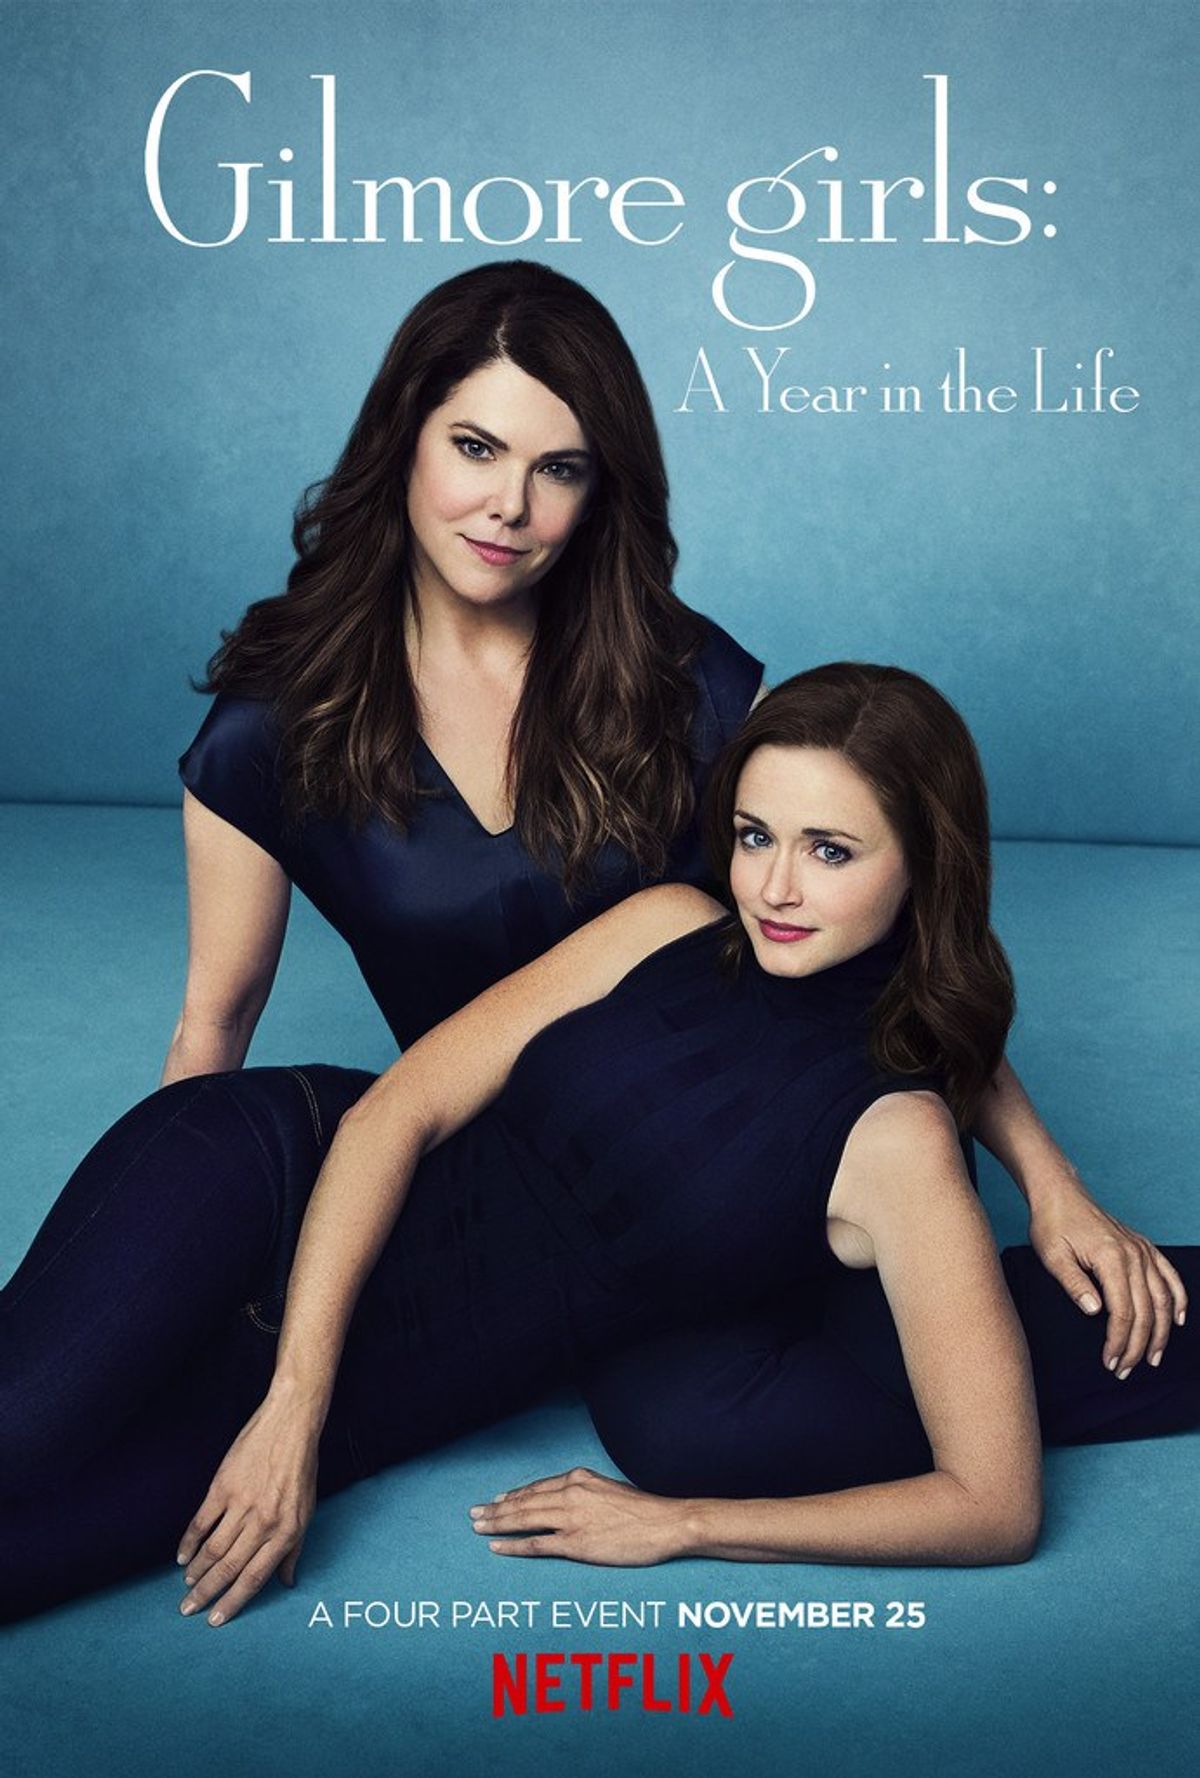 A Year in the Life of the Gilmore Girls